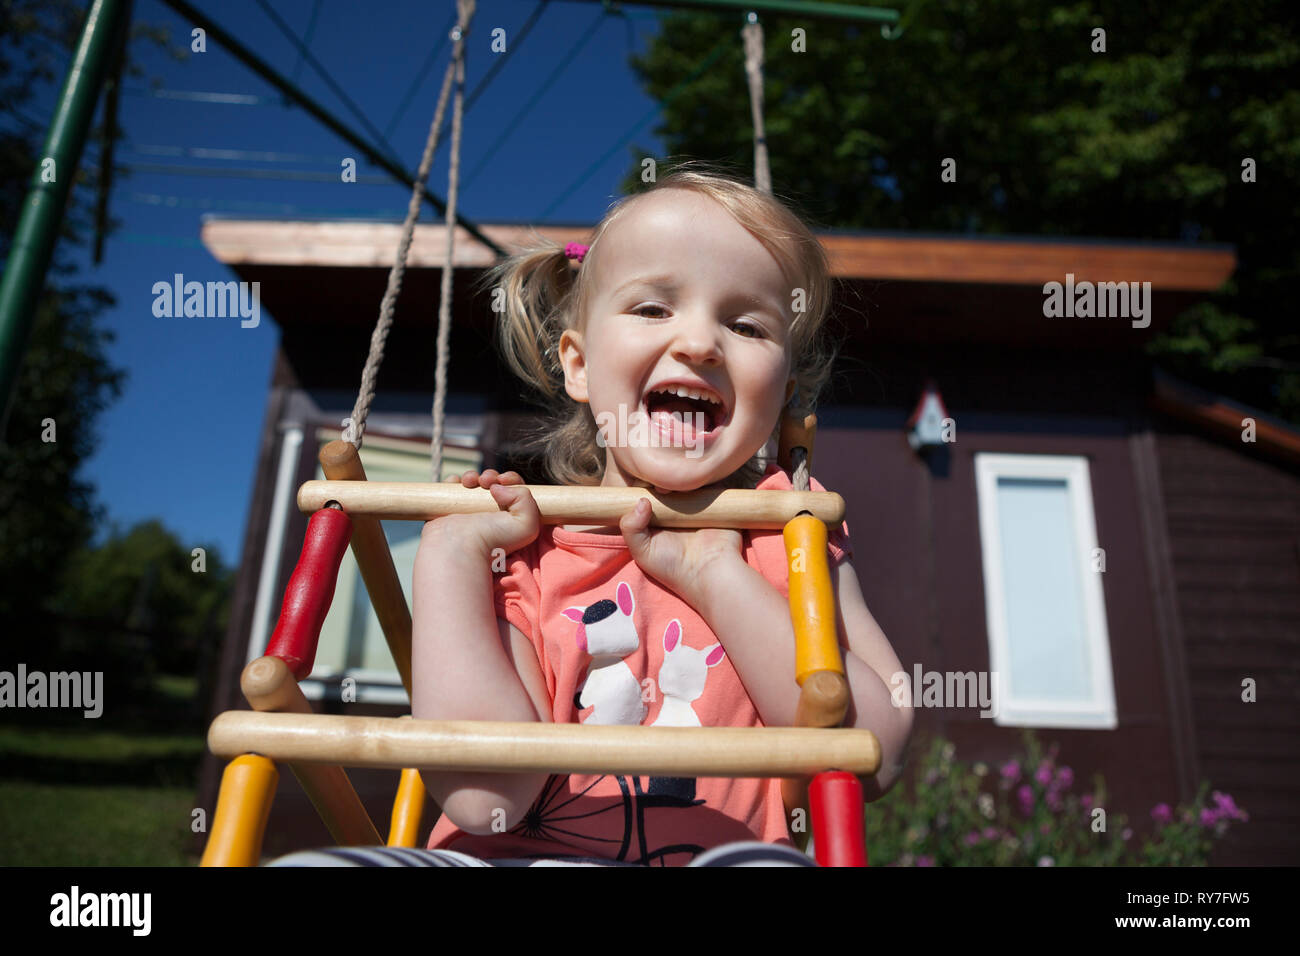 Happy child on a wooden swing in a back yard Stock Photo